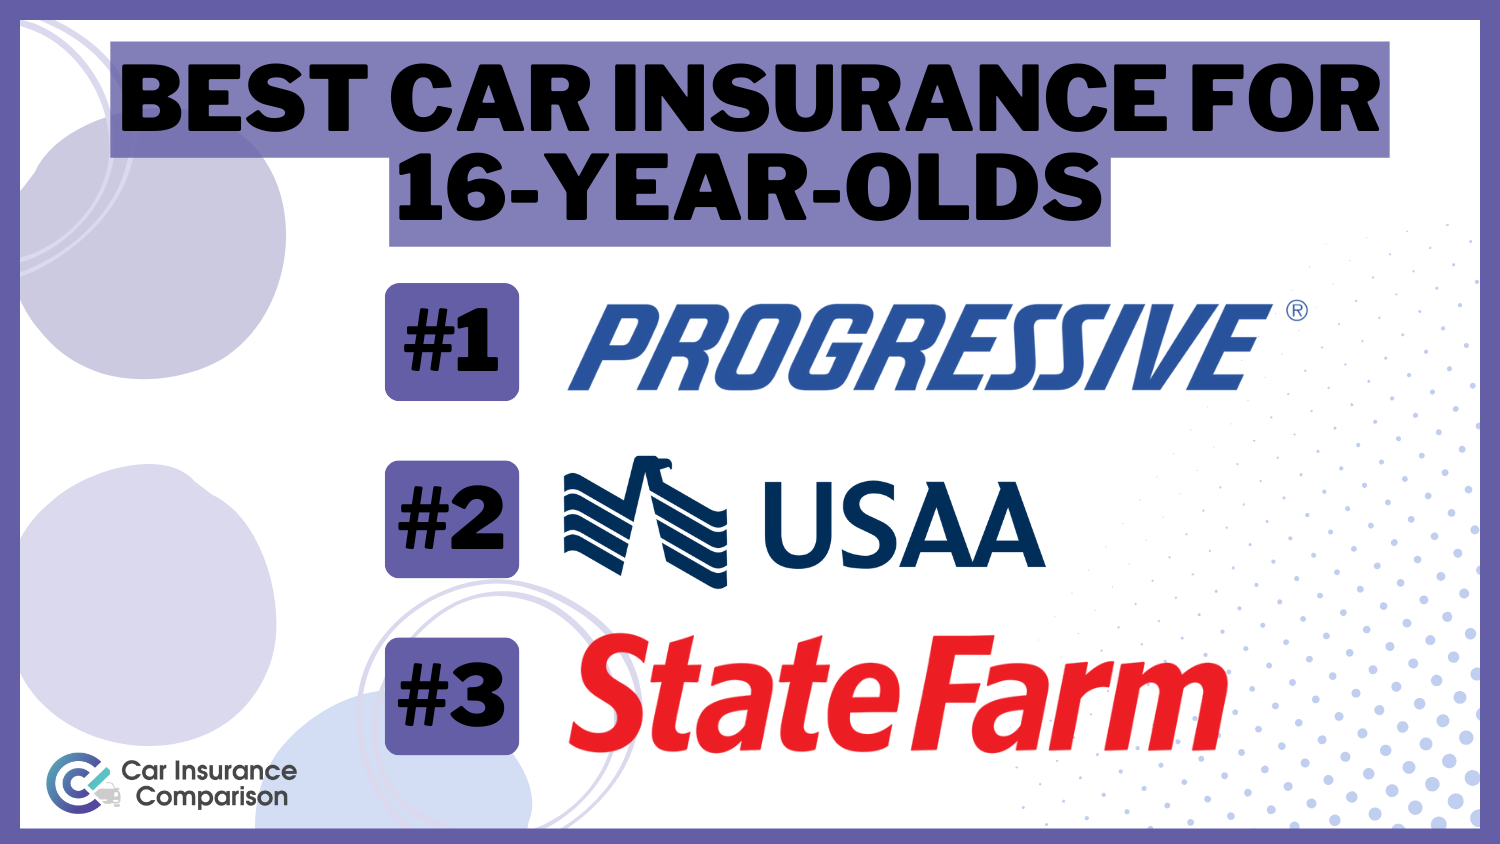 Best Car Insurance for 16-Year-Olds: Progressive, USAA, and State Farm